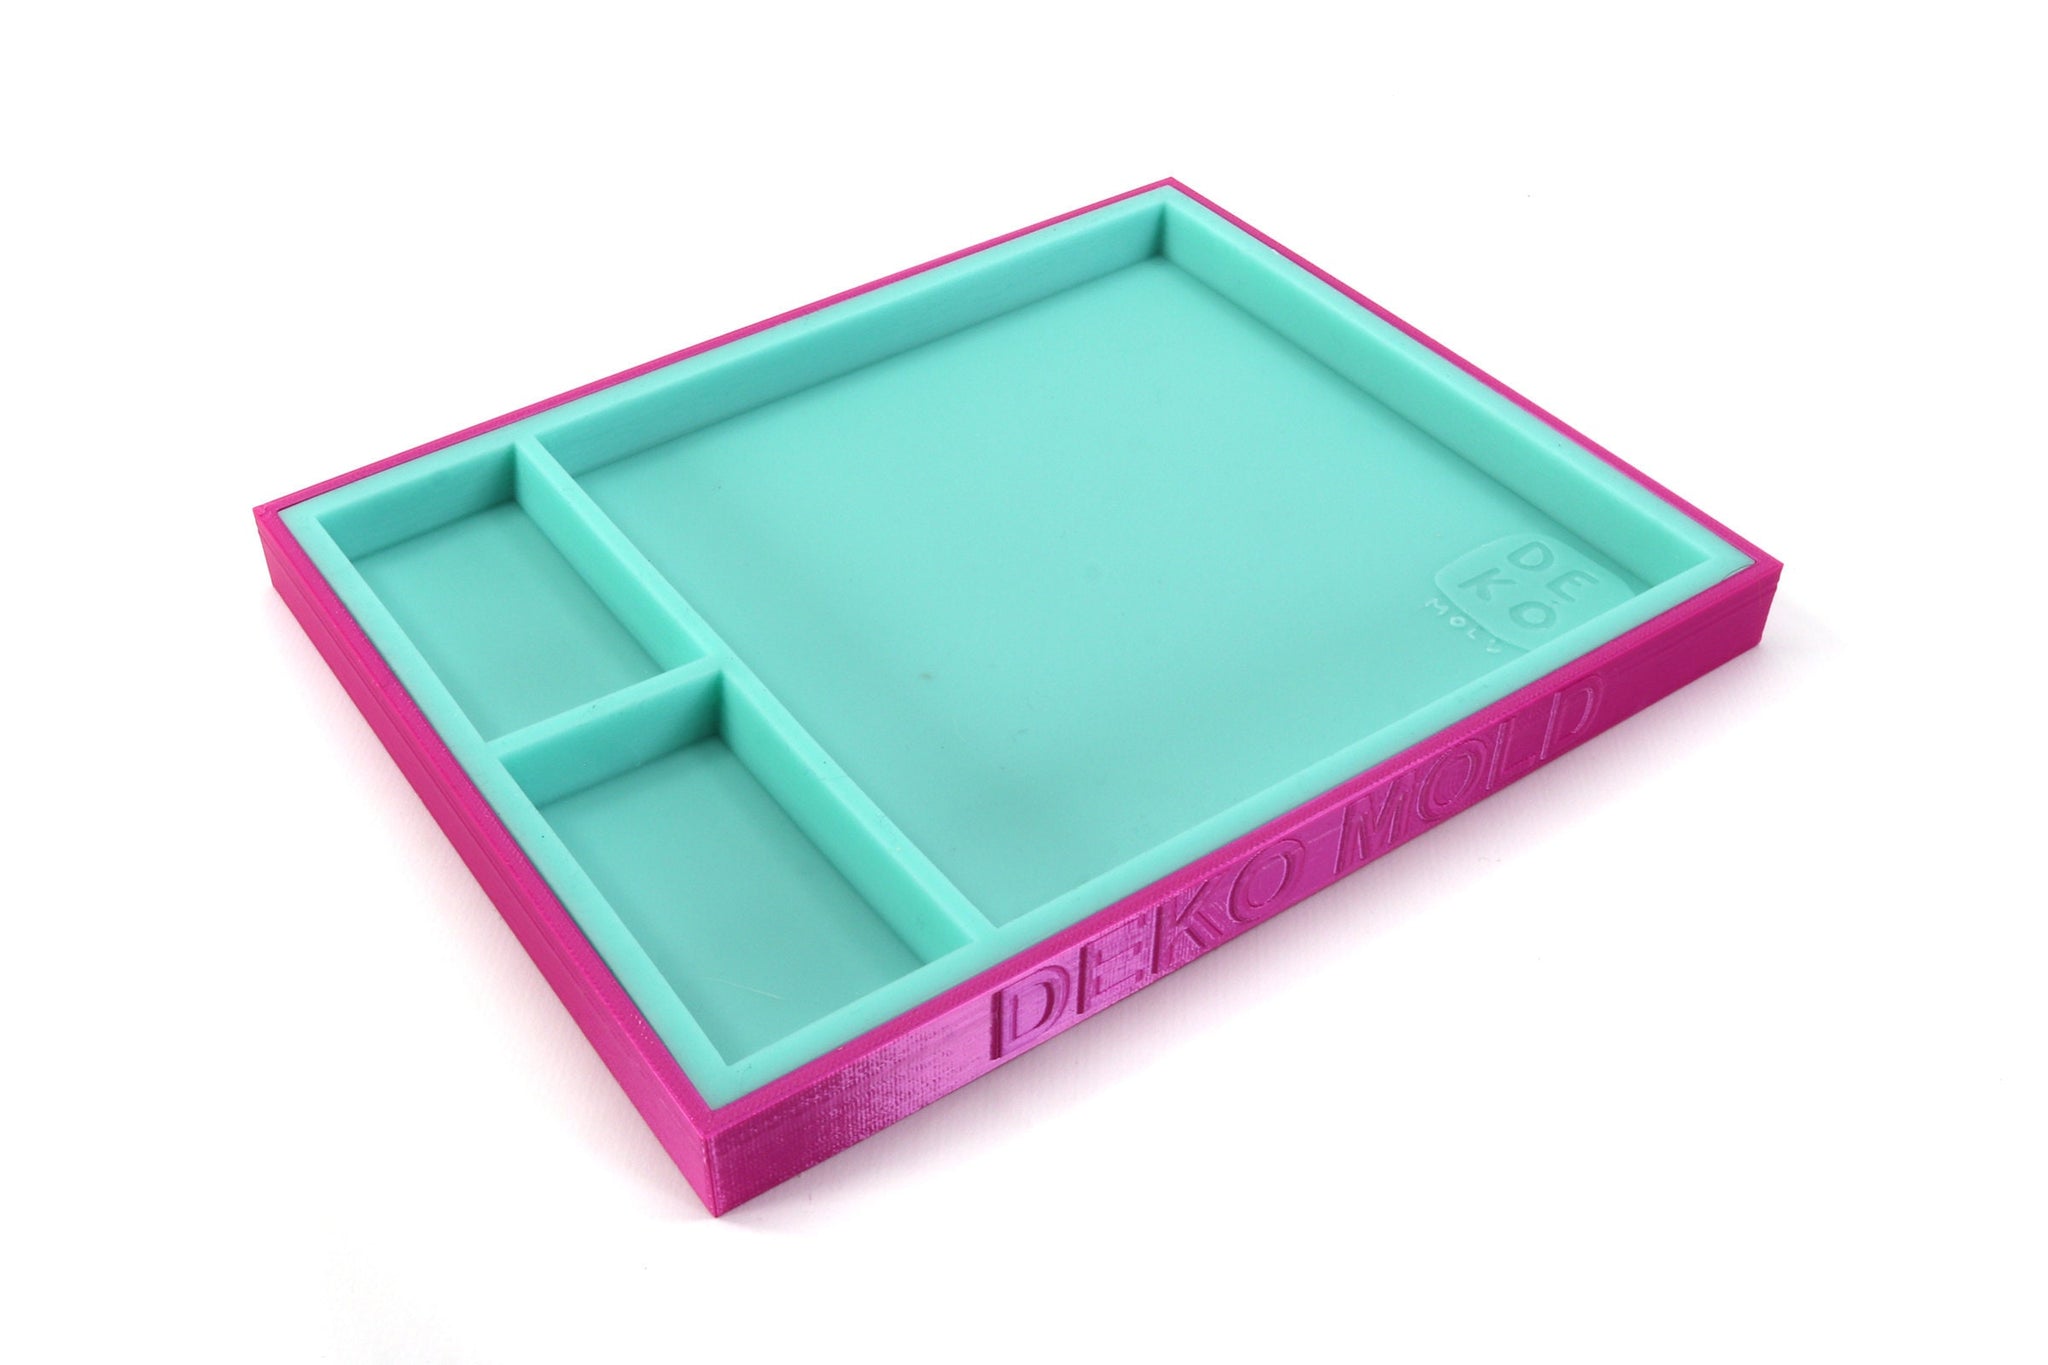 Resin Mixing Tray- Reusable Silicone insert- Resin Casting, Resin Supplies Casting Tools TL1